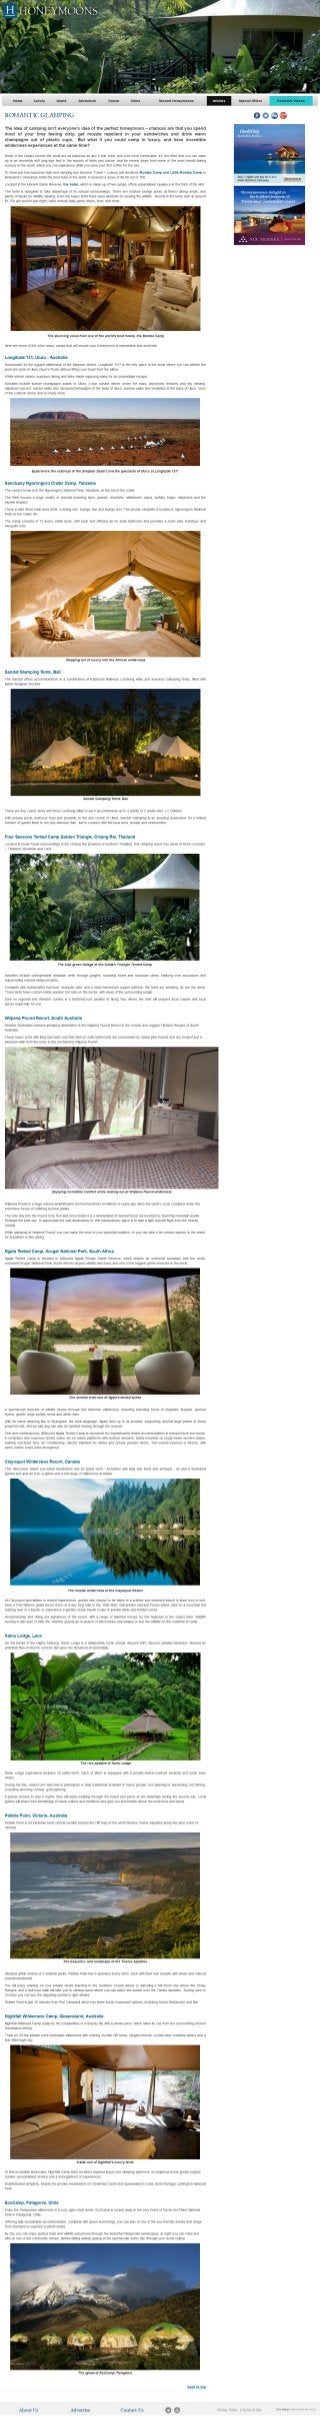 Kamu Lodge featured in  the world's most luxurious tents for honey glamping by Honeymoons, May 2014